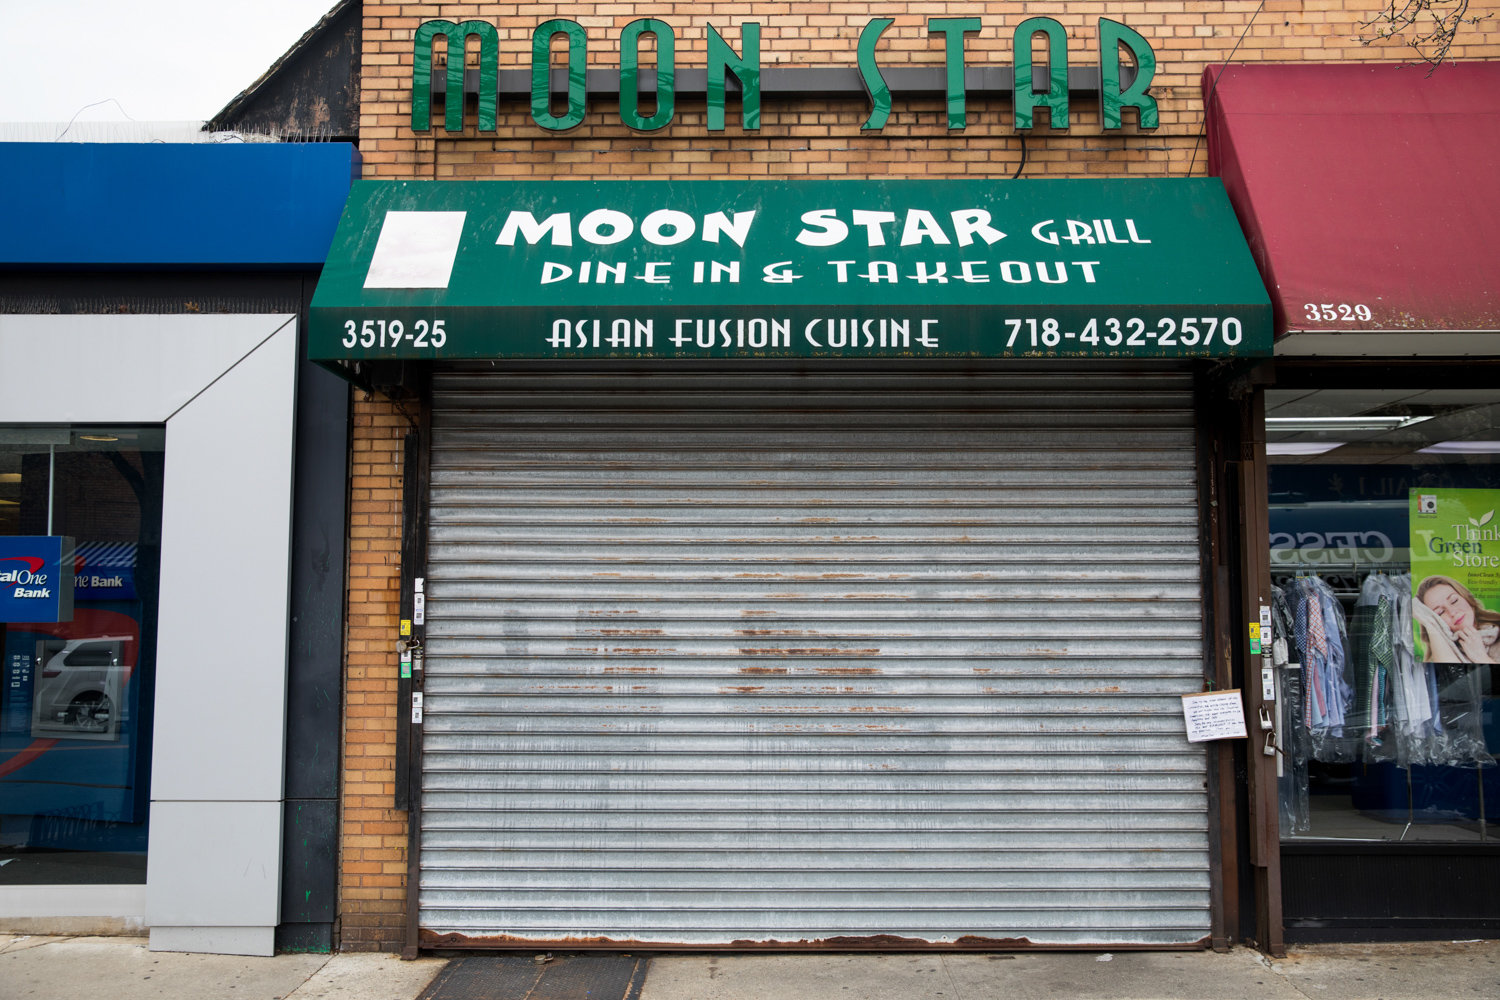 Moon Star is one of several Johnson Avenue eateries that closed as a result of the coronavirus pandemic. When stores like this can reopen again will depend a lot on testing availability, according to elected officials.